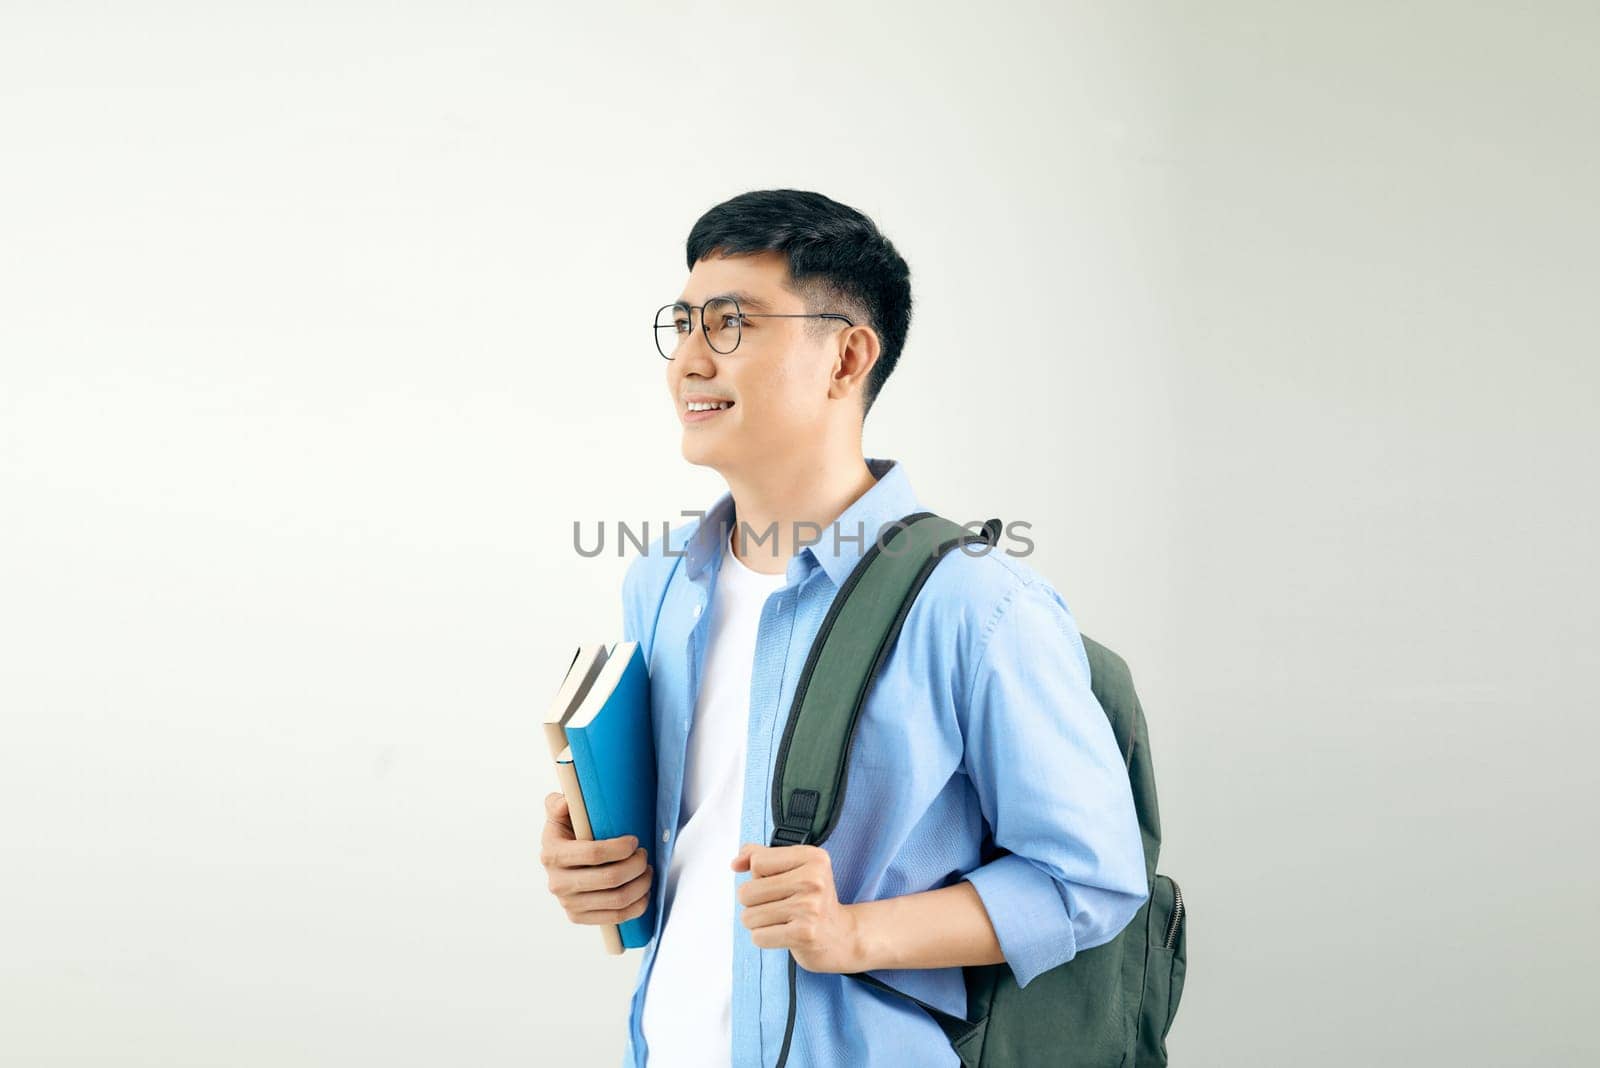 Young smiley student holding books carrying backpack, isolated on a white background. by makidotvn